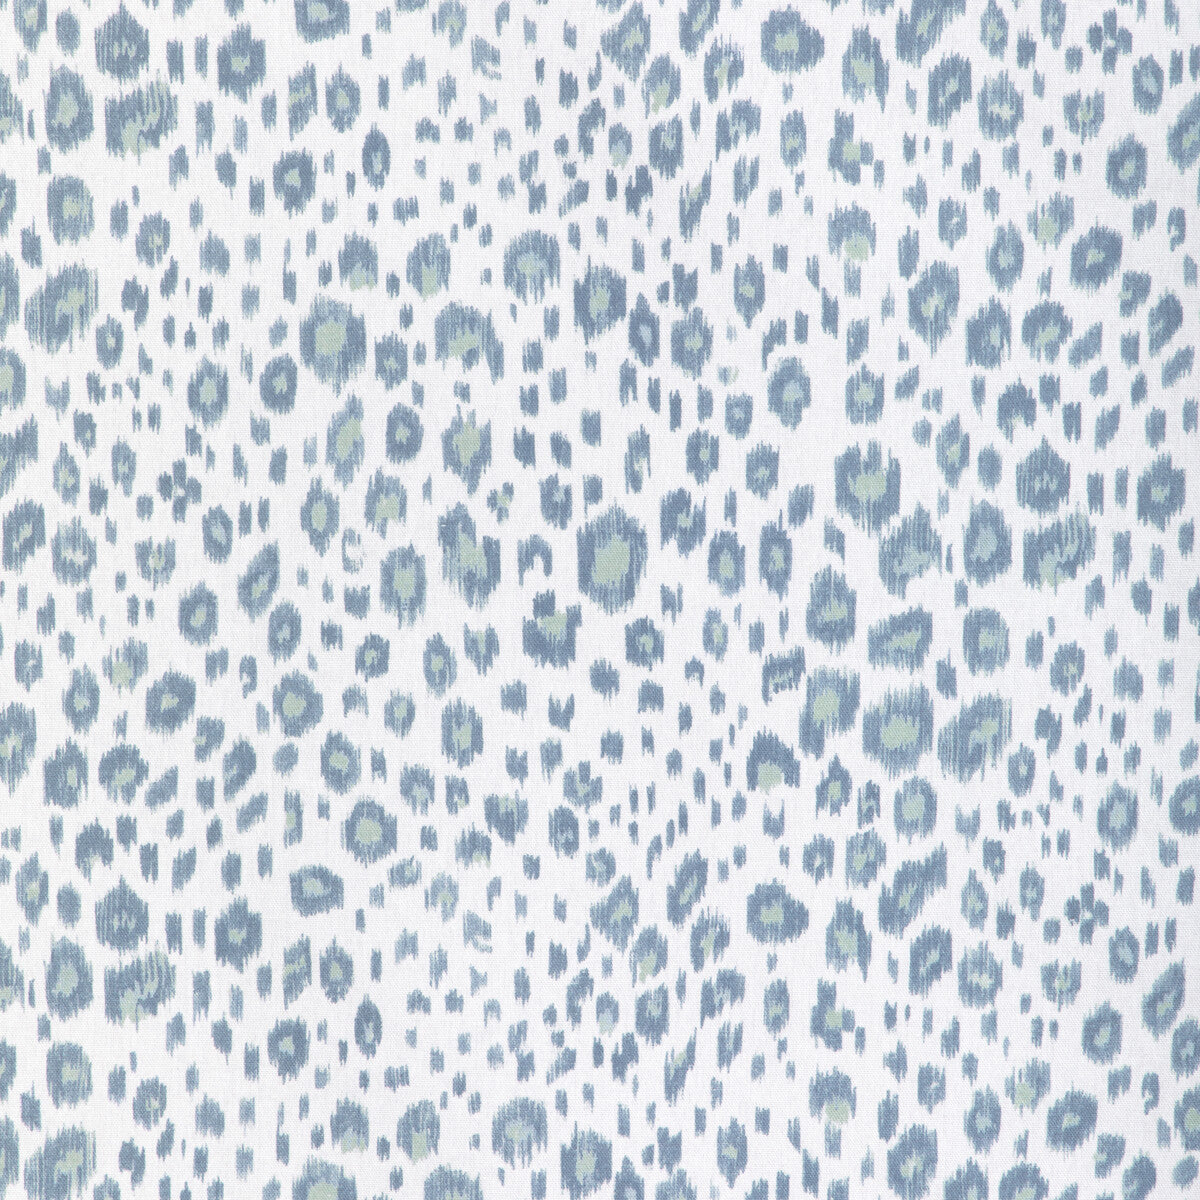 Leopardos fabric in sky color - pattern LEOPARDOS.15.0 - by Kravet Basics in the Small Scale Prints collection